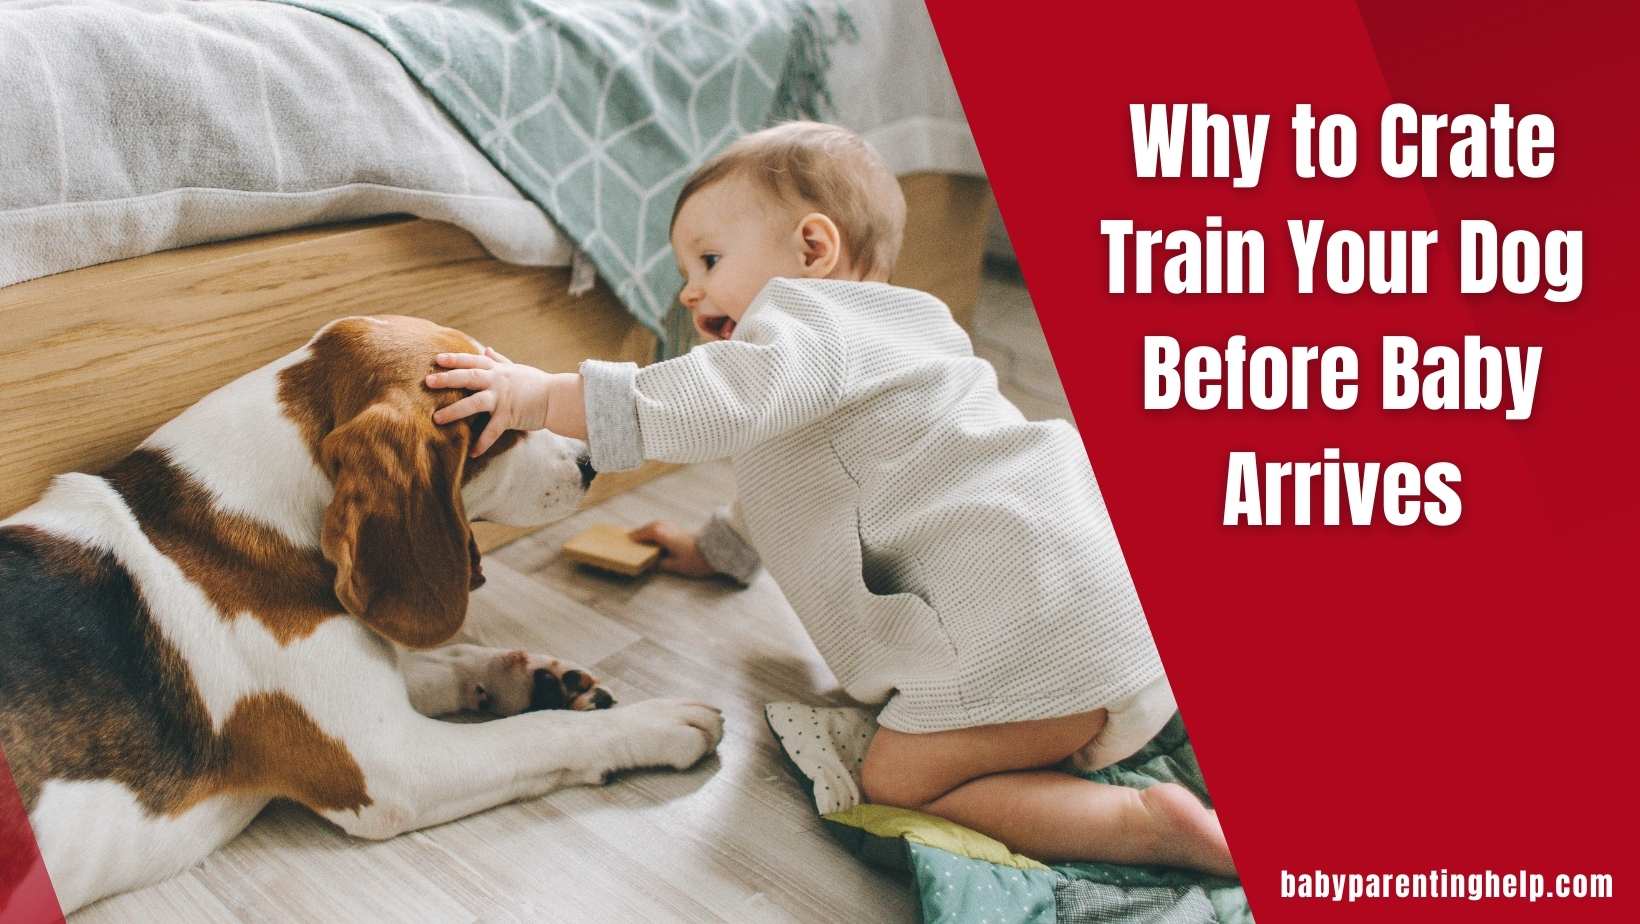 Why to Crate Train Your Dog Before Baby Arrives